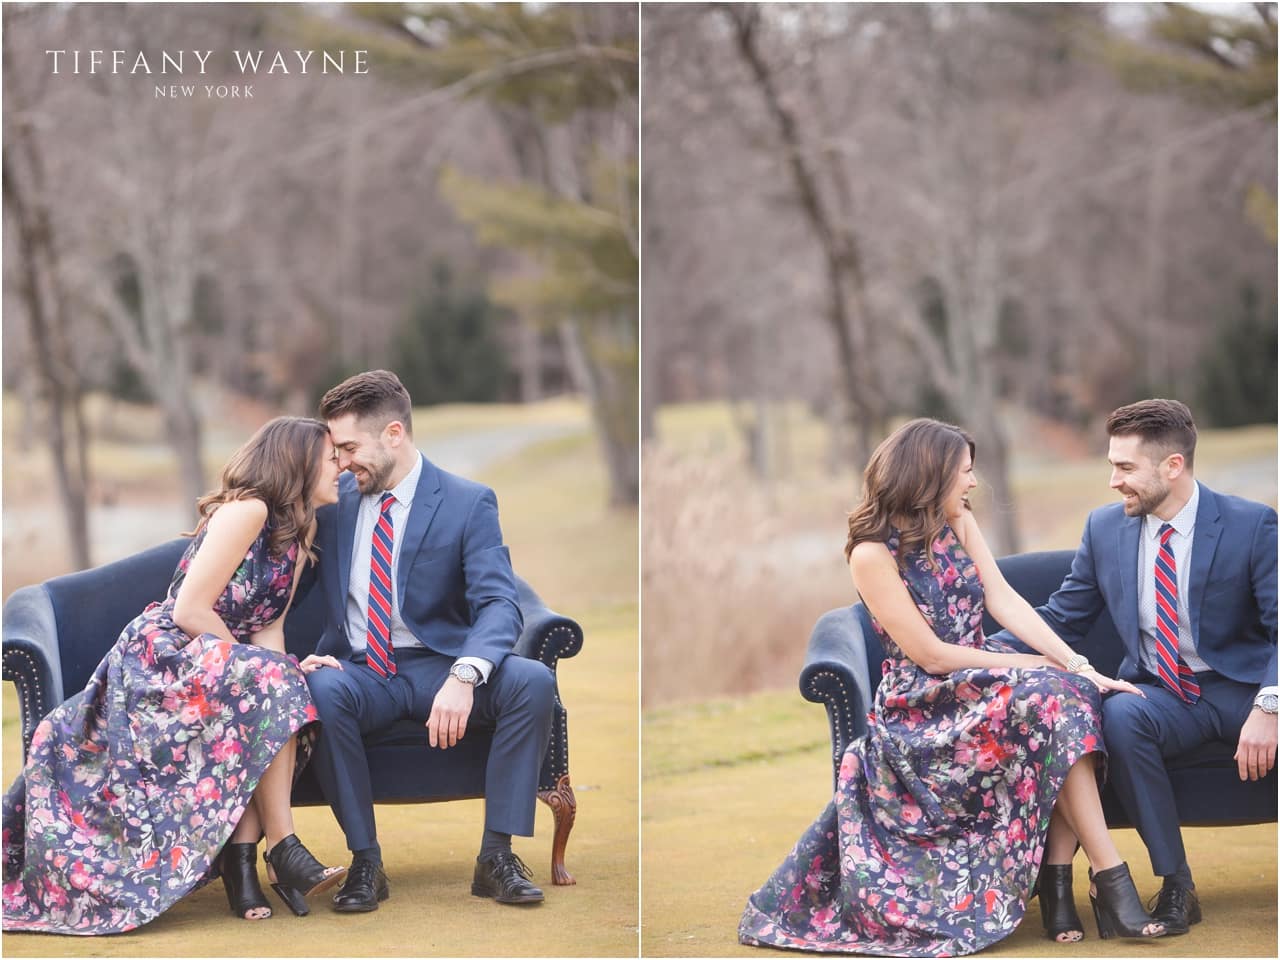 NY engagement session featuring vintage sofa